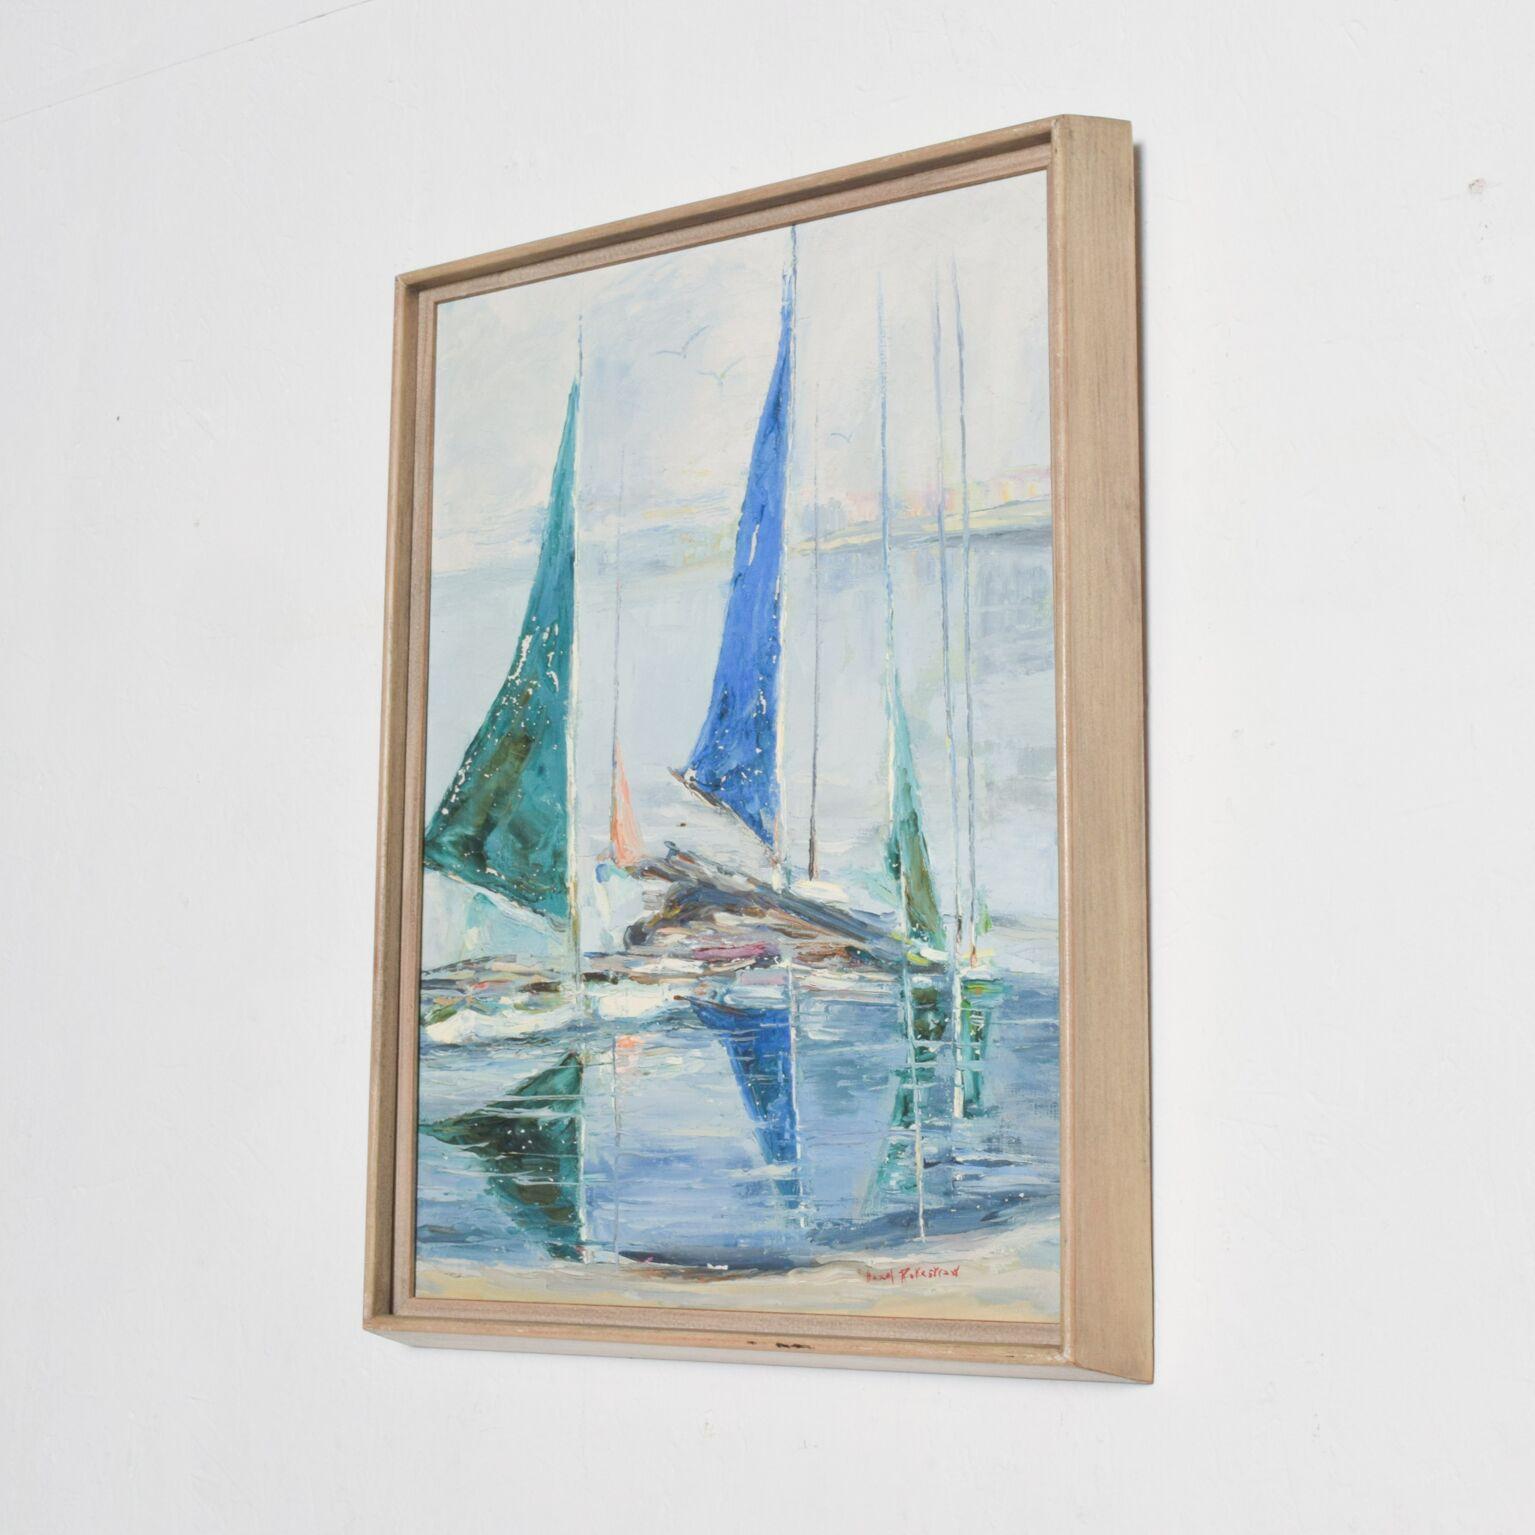 Vintage Midcentury Art
Oil on canvas by California artist Hazel Rakestraw. Signed on lower right corner. 
Painting features three sailing boats in the water.
Ms Hazel Rakestraw is known for her paintings mostly from La Jolla California. 
Original